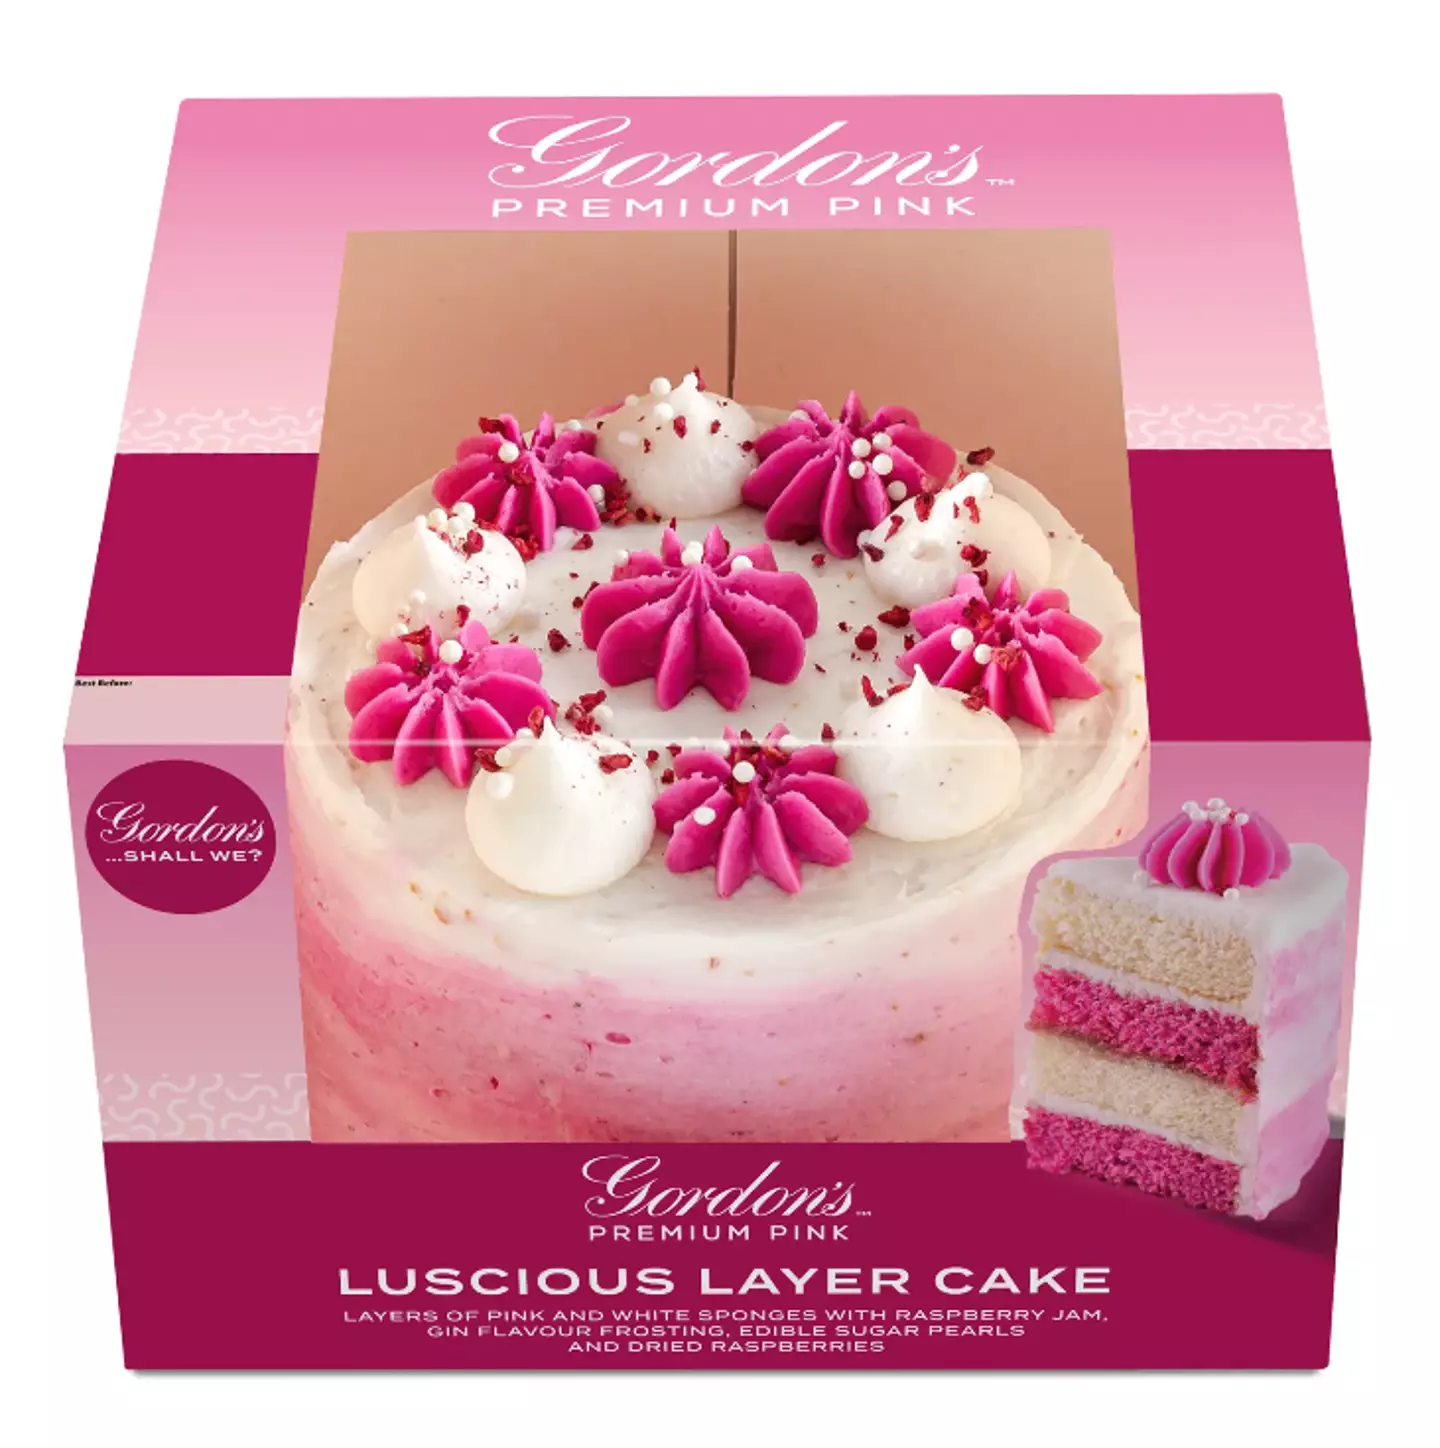 The premium pink gin cake is available at Asda now (